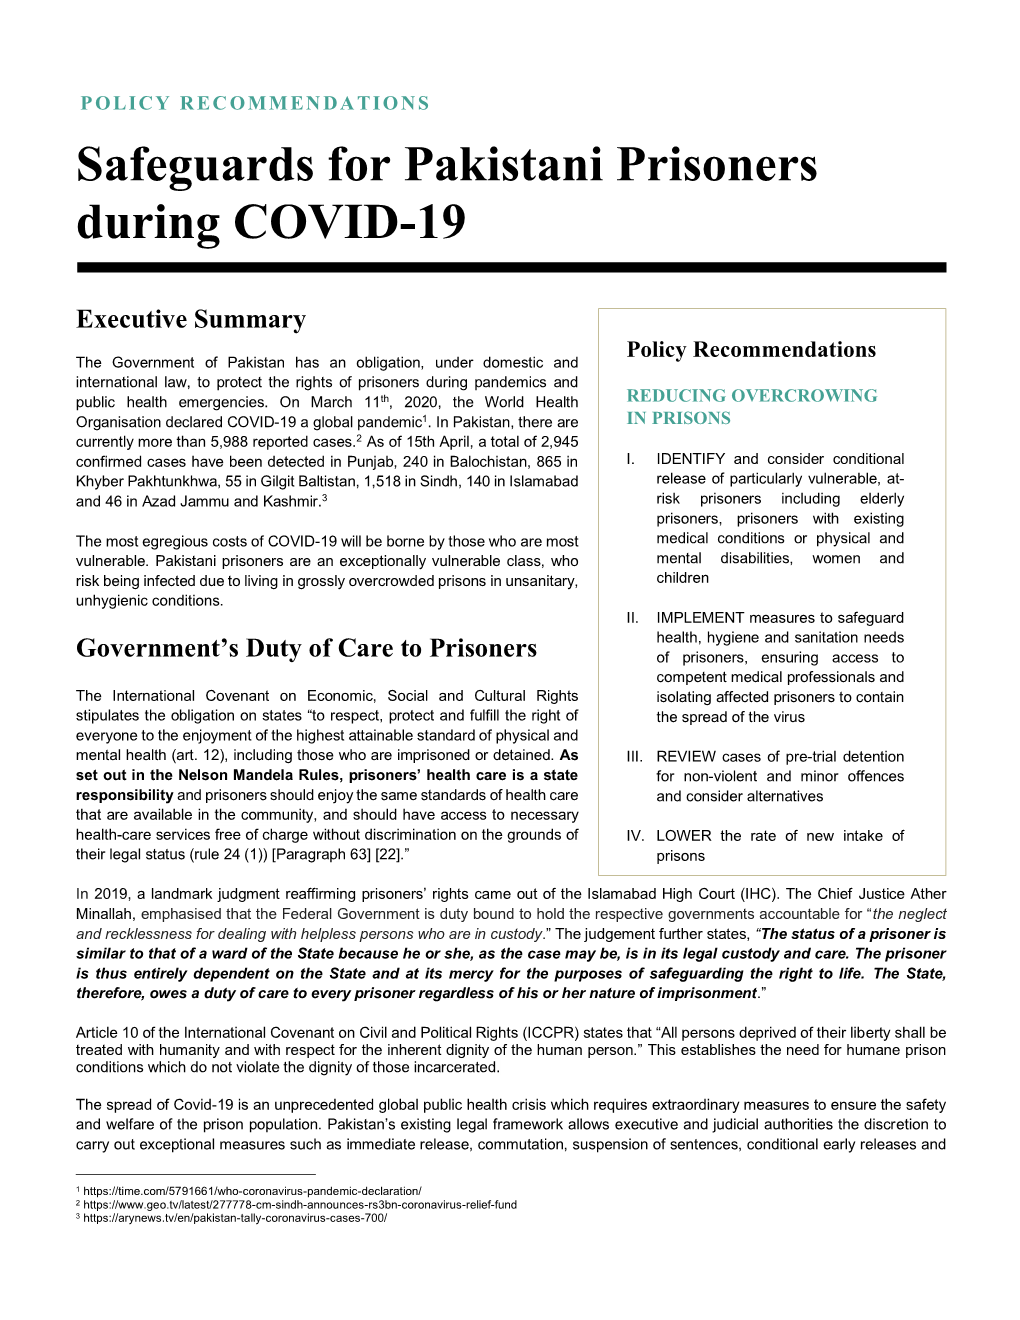 Policy Recommendations for Pakistani Prisoners During COVID-19